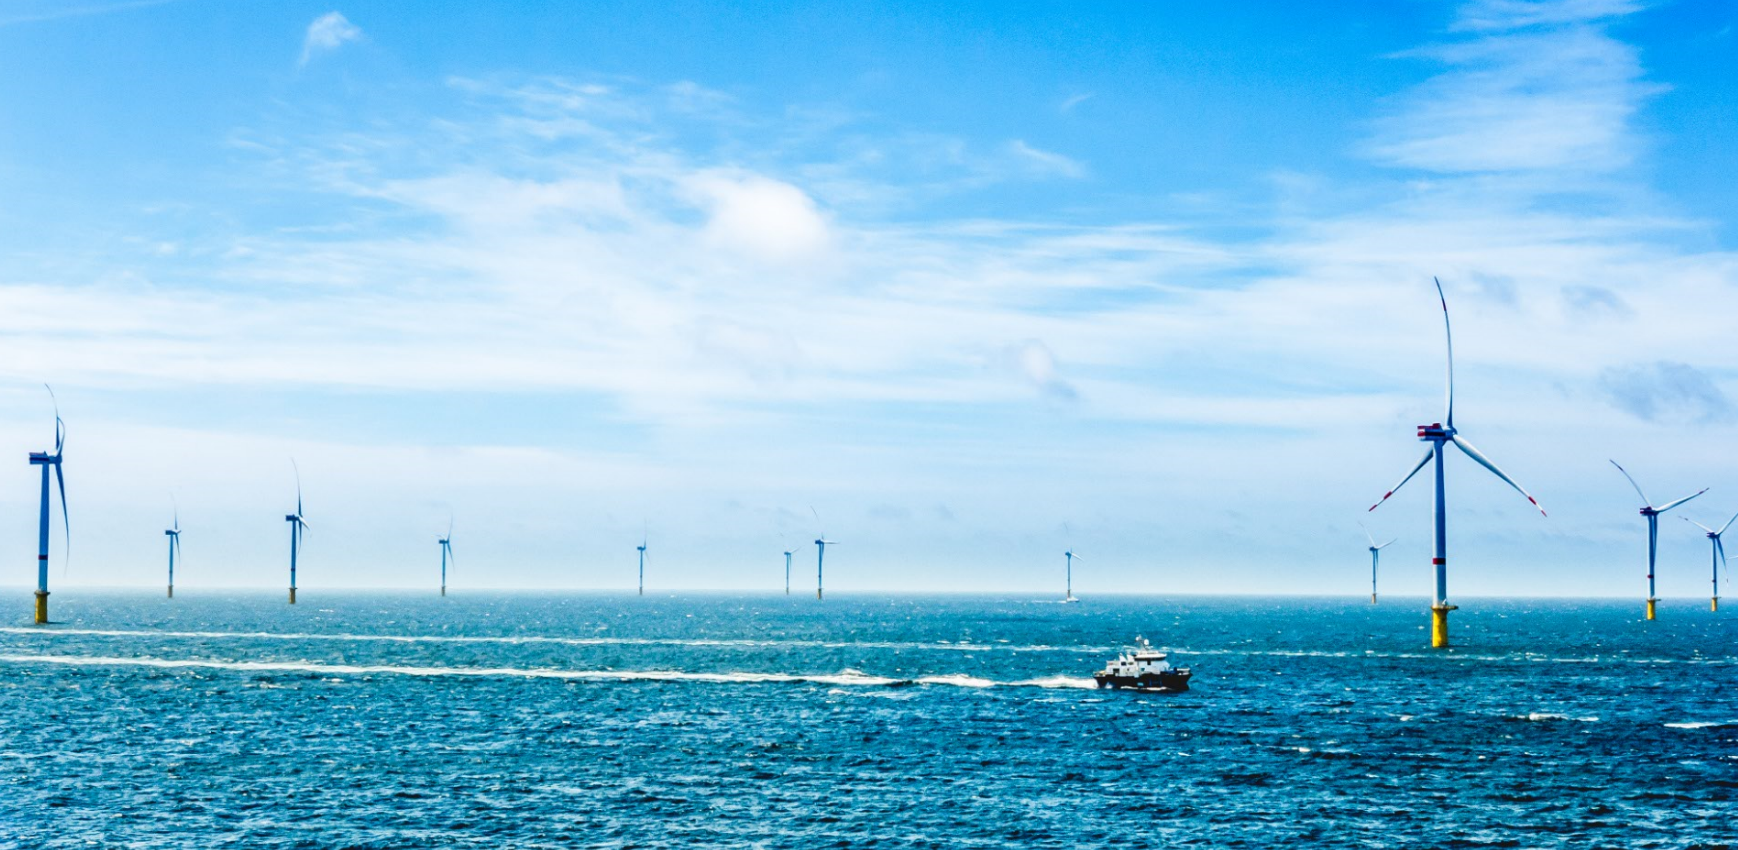 The Veja Mate offshore wind farm